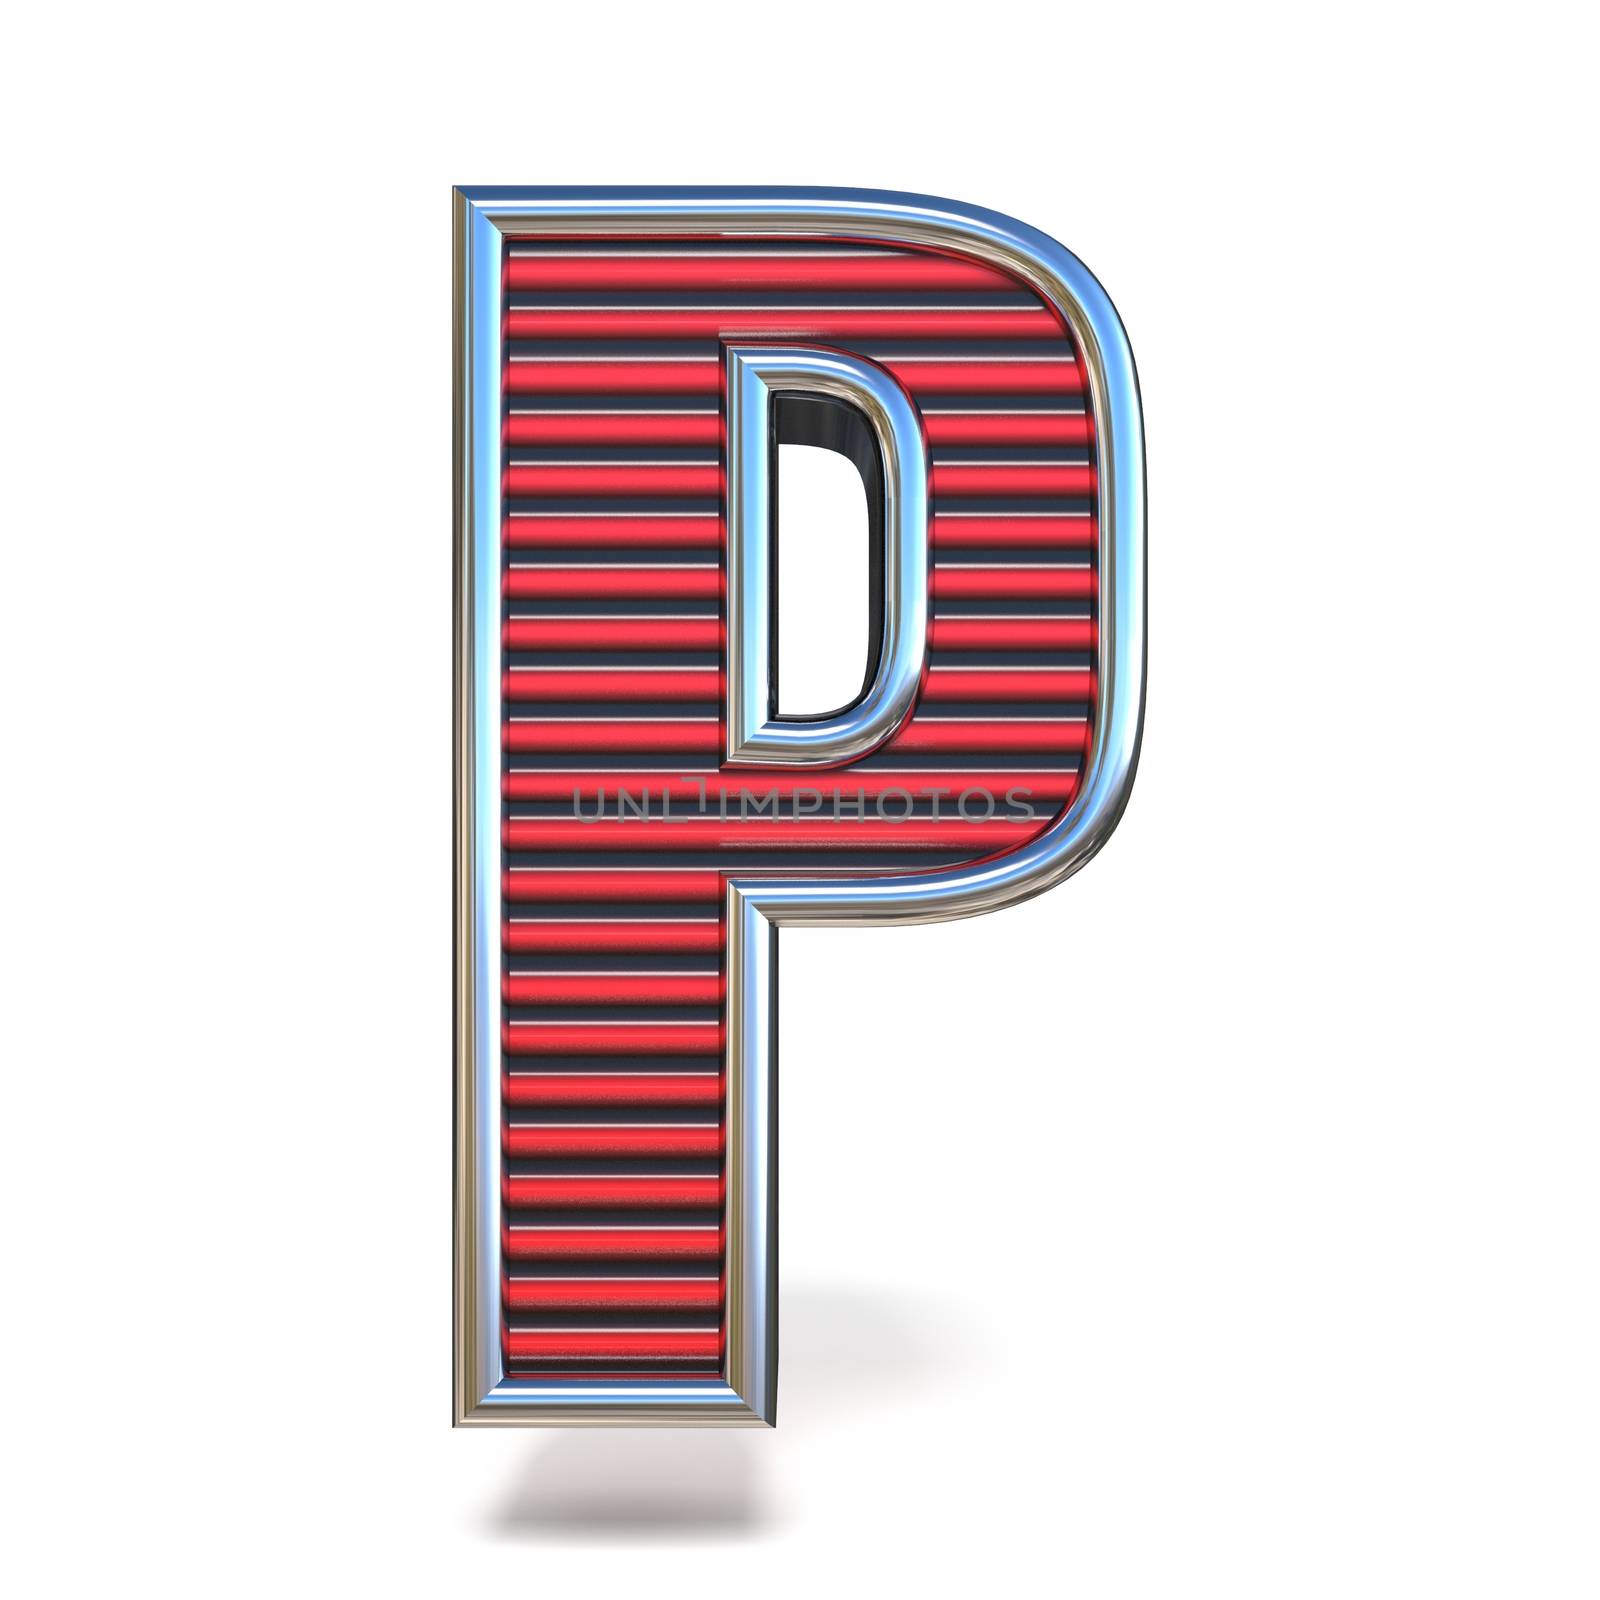 Metal red lines font Letter P 3D render illustration isolated on white background